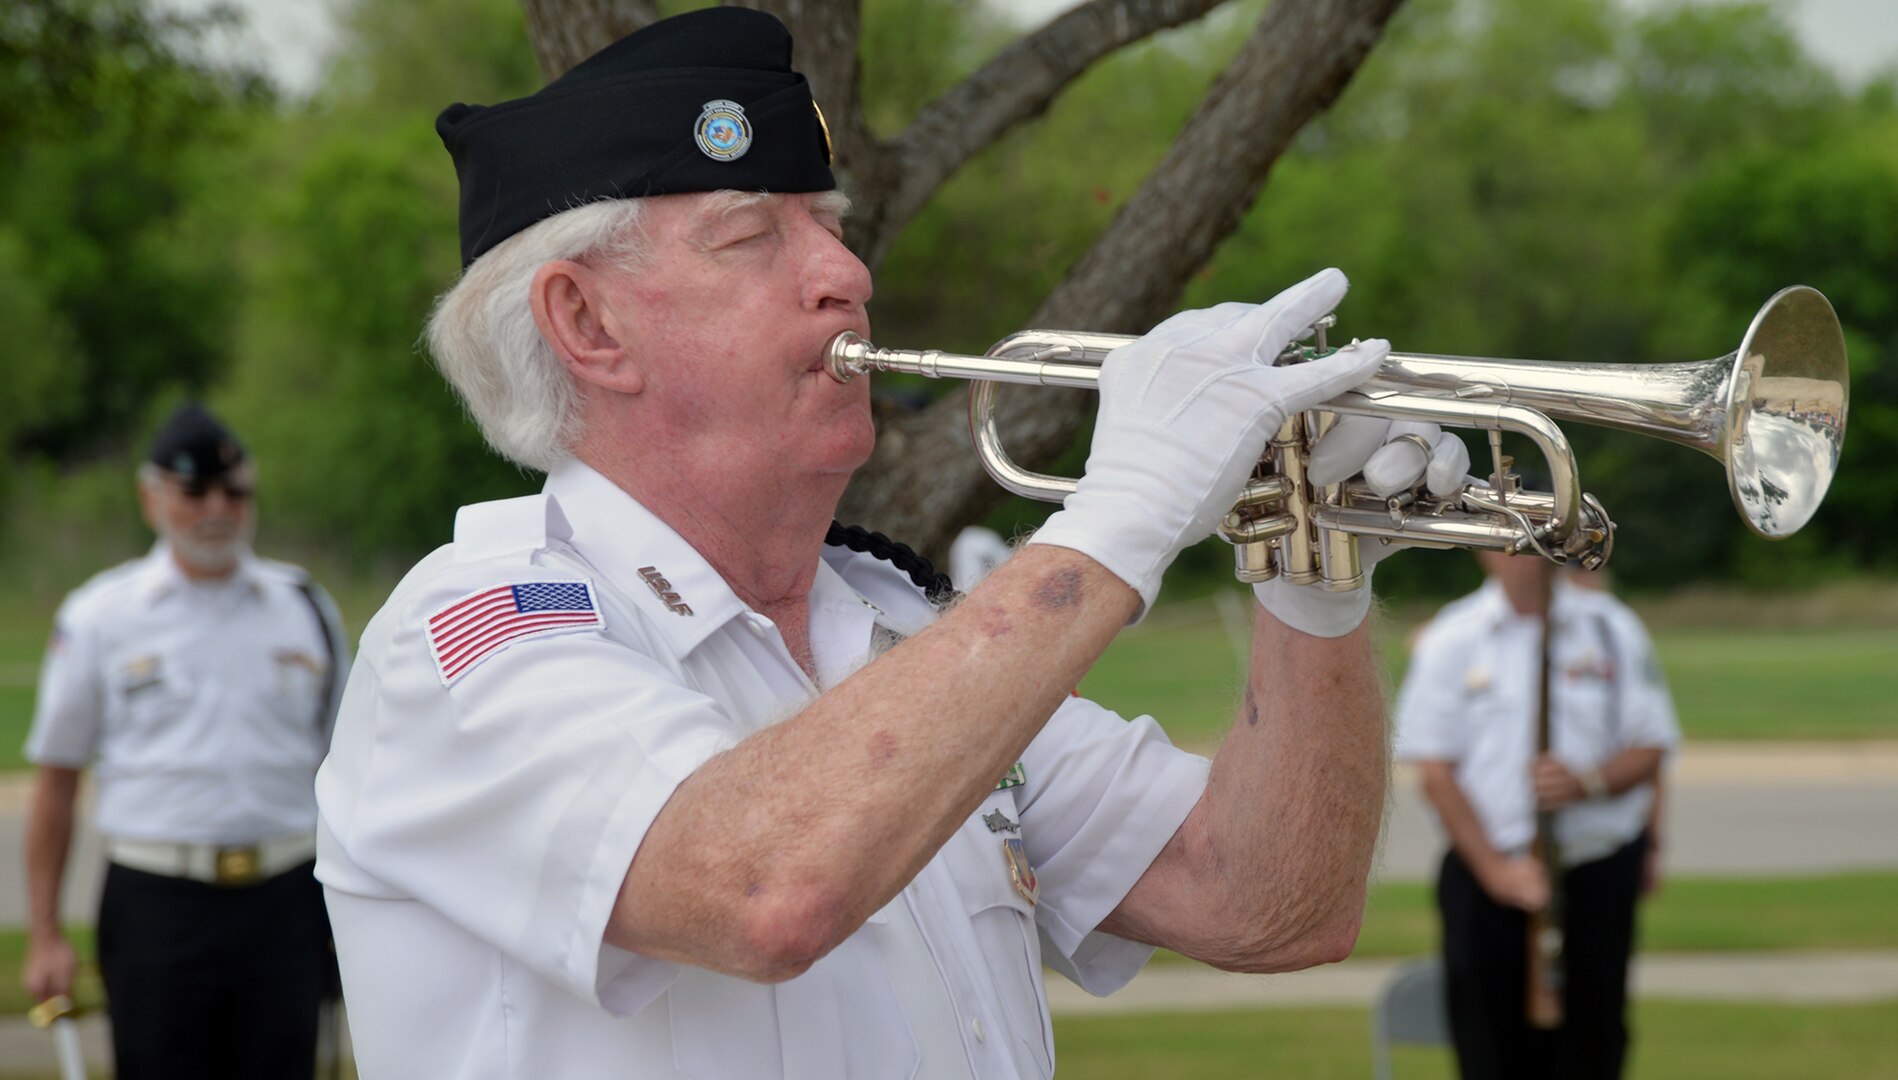 A member of the Fort Sam Houston Memorial Services Detachment plays "Taps" near the end of the ceremony for the 50th Anniversary of the Commemoration of the Vietnam War at the Fort Sam Houston National Cemetery March 27.